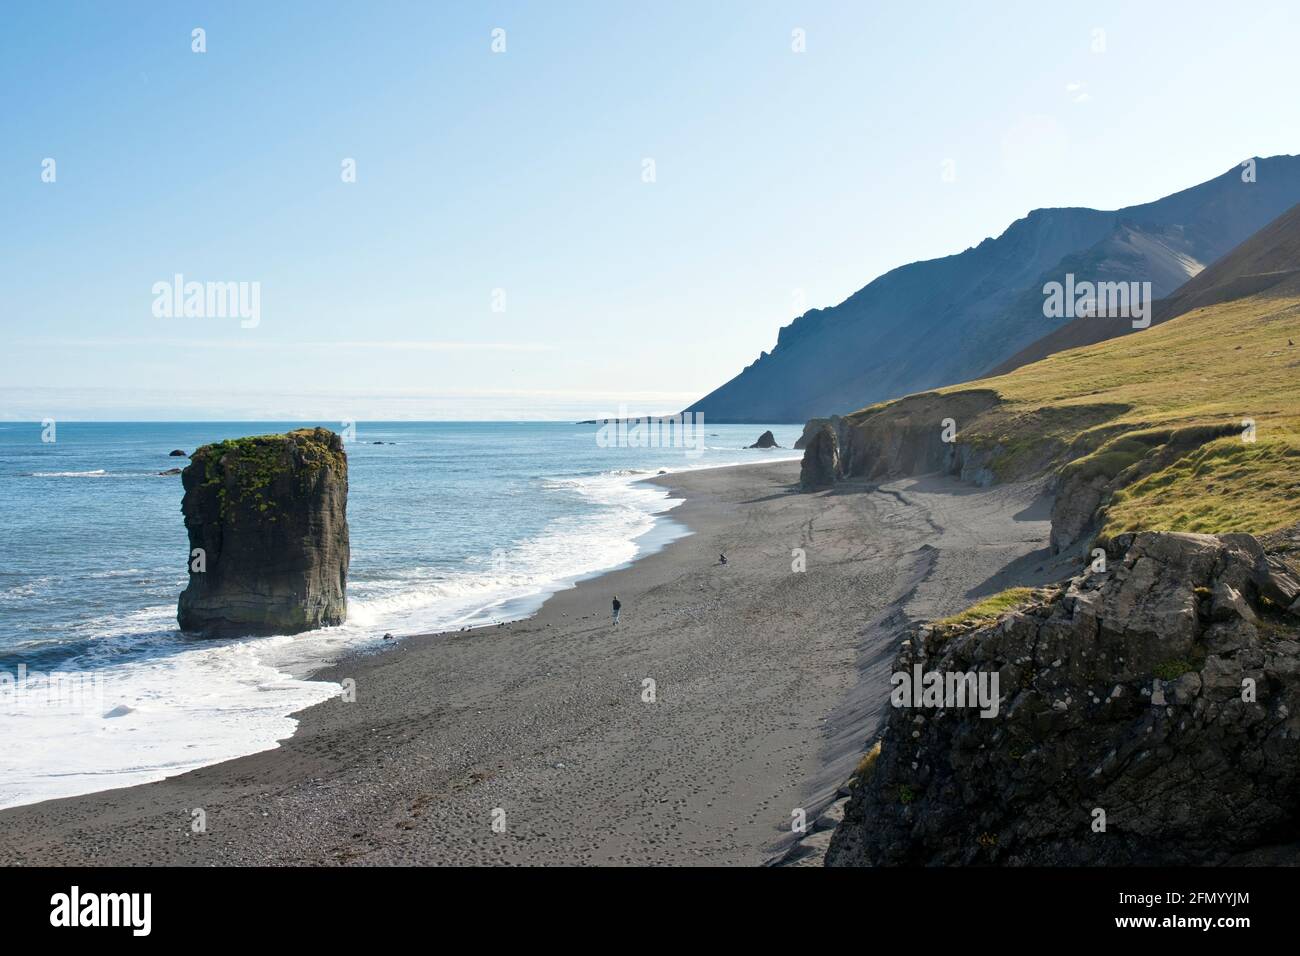 People walk on the black sand beach, along the cliffs and rock formations at Fauskasandur in east Iceland. Stock Photo